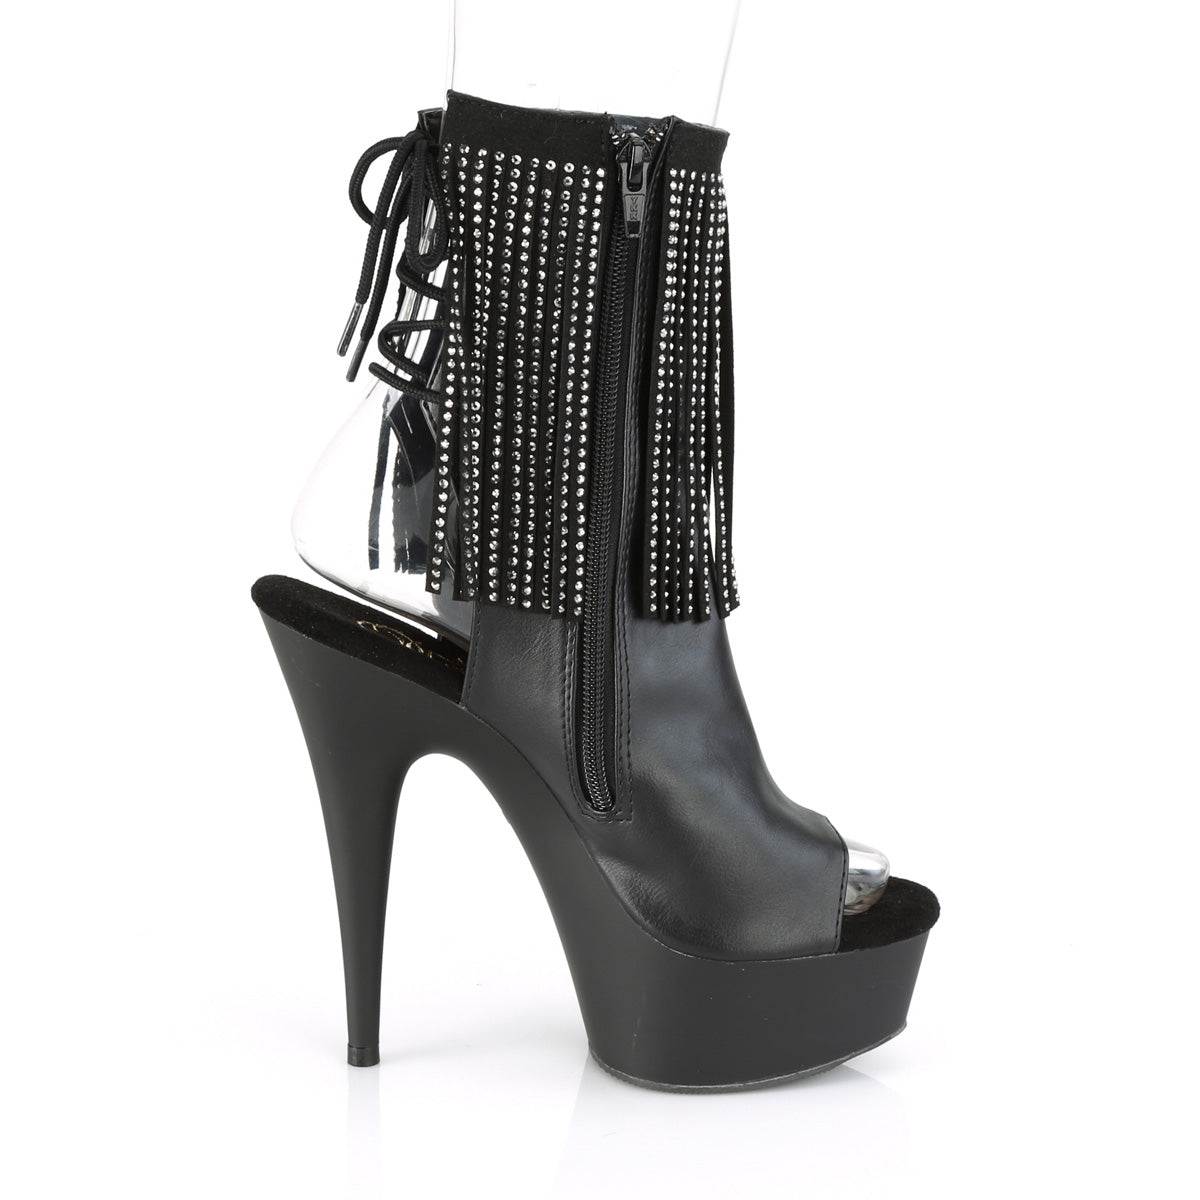 DELIGHT-1018RSF Pleaser 6 Inch Heel Black Pole Dance Shoes-Pleaser- Sexy Shoes Fetish Heels